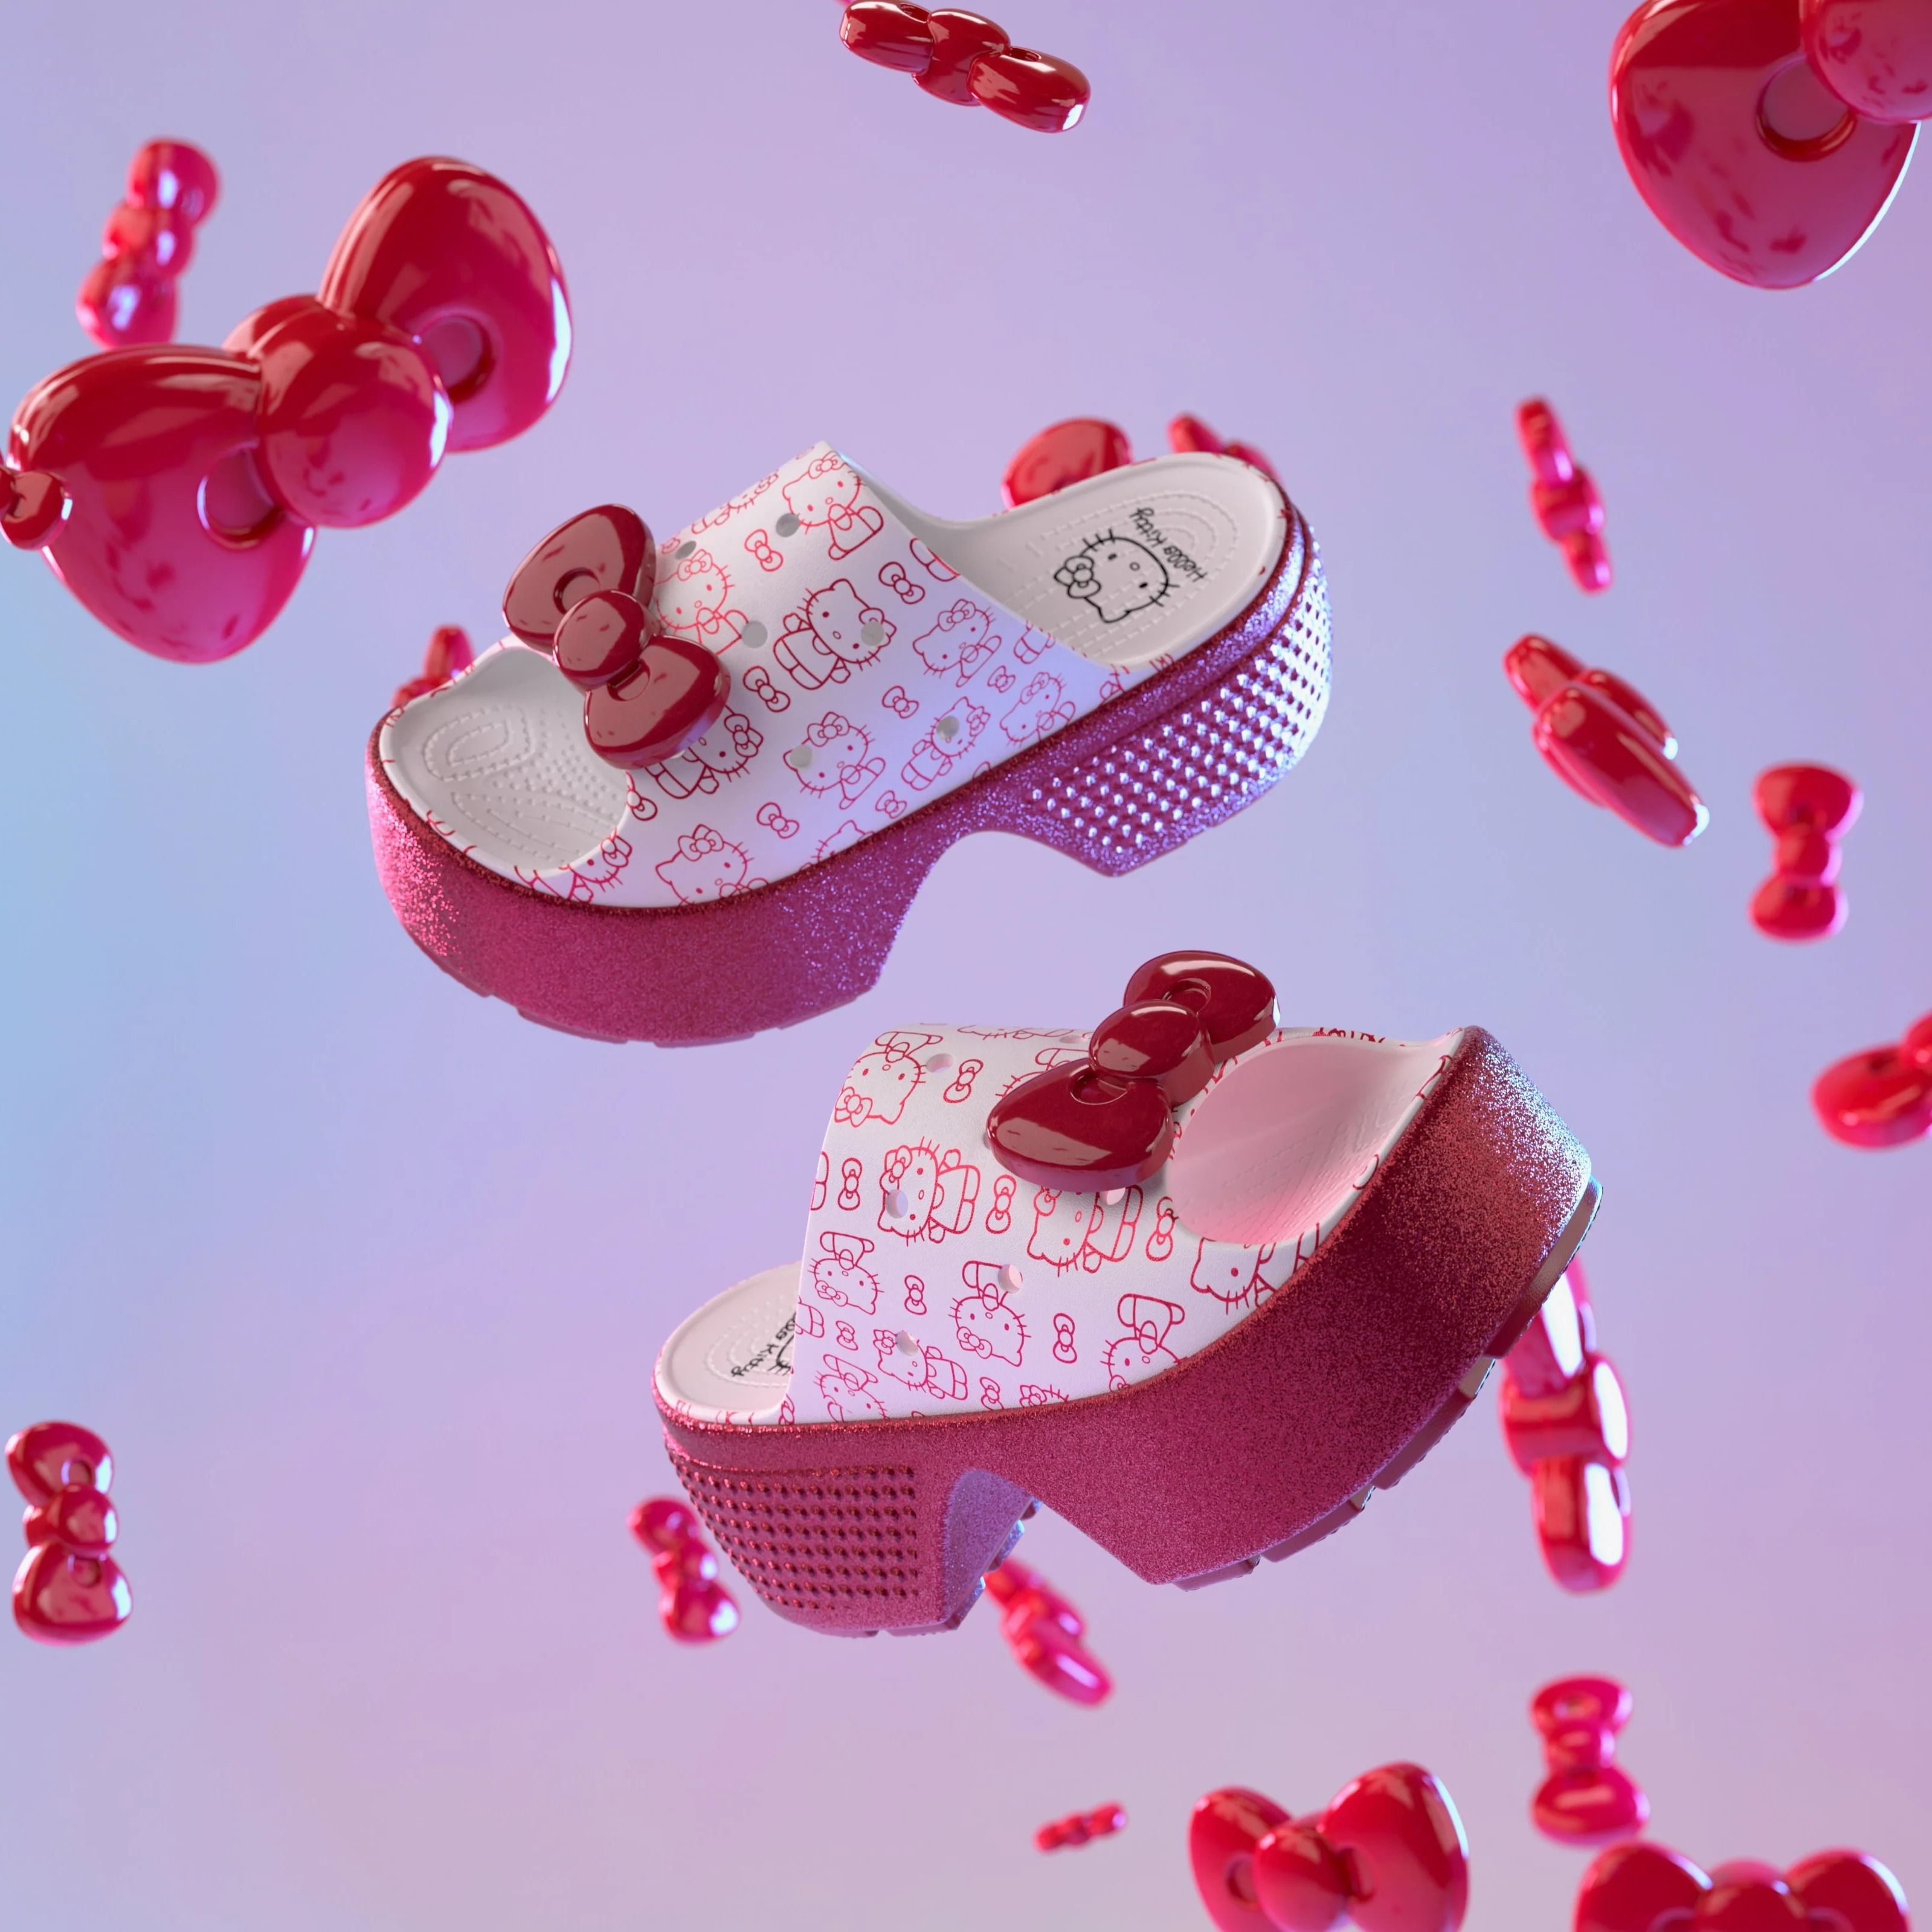 Sanrio's Hello Kitty Releases Special Anniversary Crocs for Kids and Adults